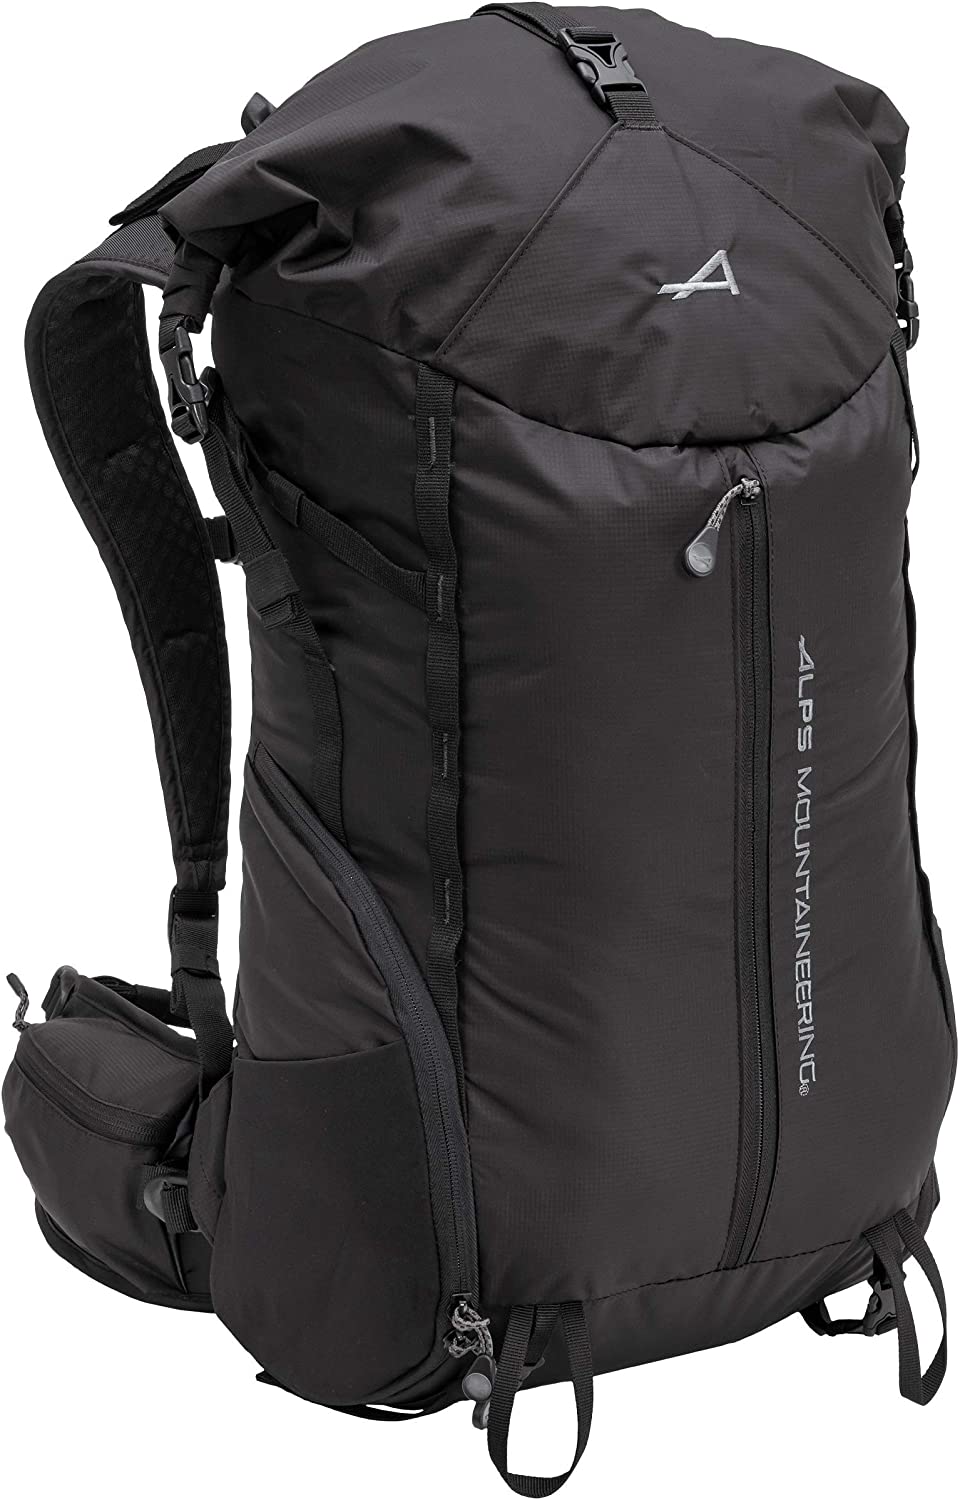 ALPS Mountaineering Tour Day Backpack 35-45L, Black - AL6323001